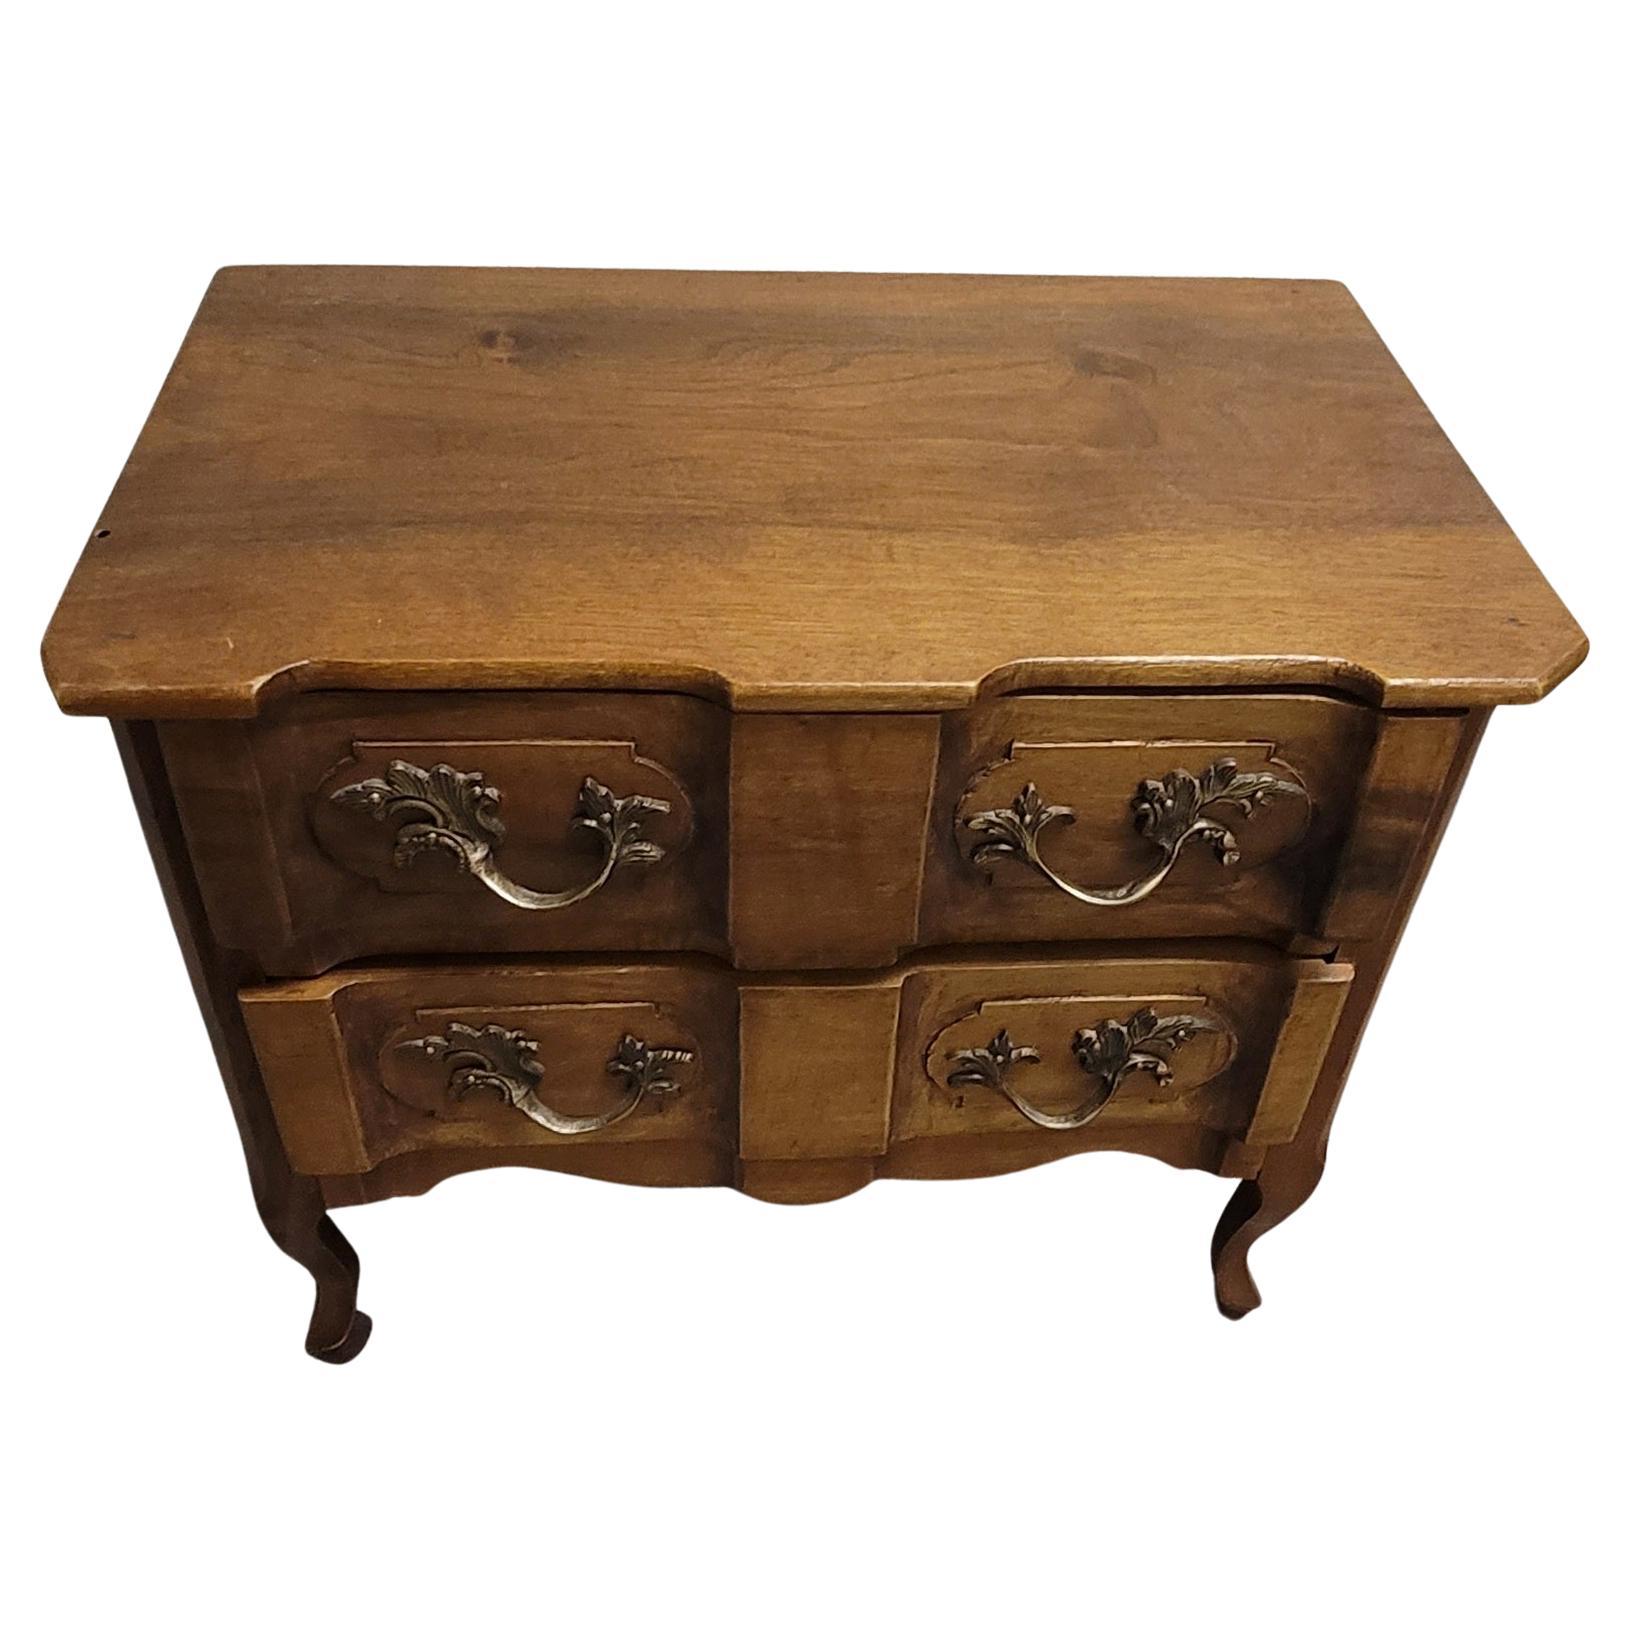 Exquisite hand-crafted french provincial walnut diminutive commode. 100% hand made. Excellent hand-rubbed finish. Great as jewelry chest in the bedroom or just for display in the living room.
Excellent vintage condition.